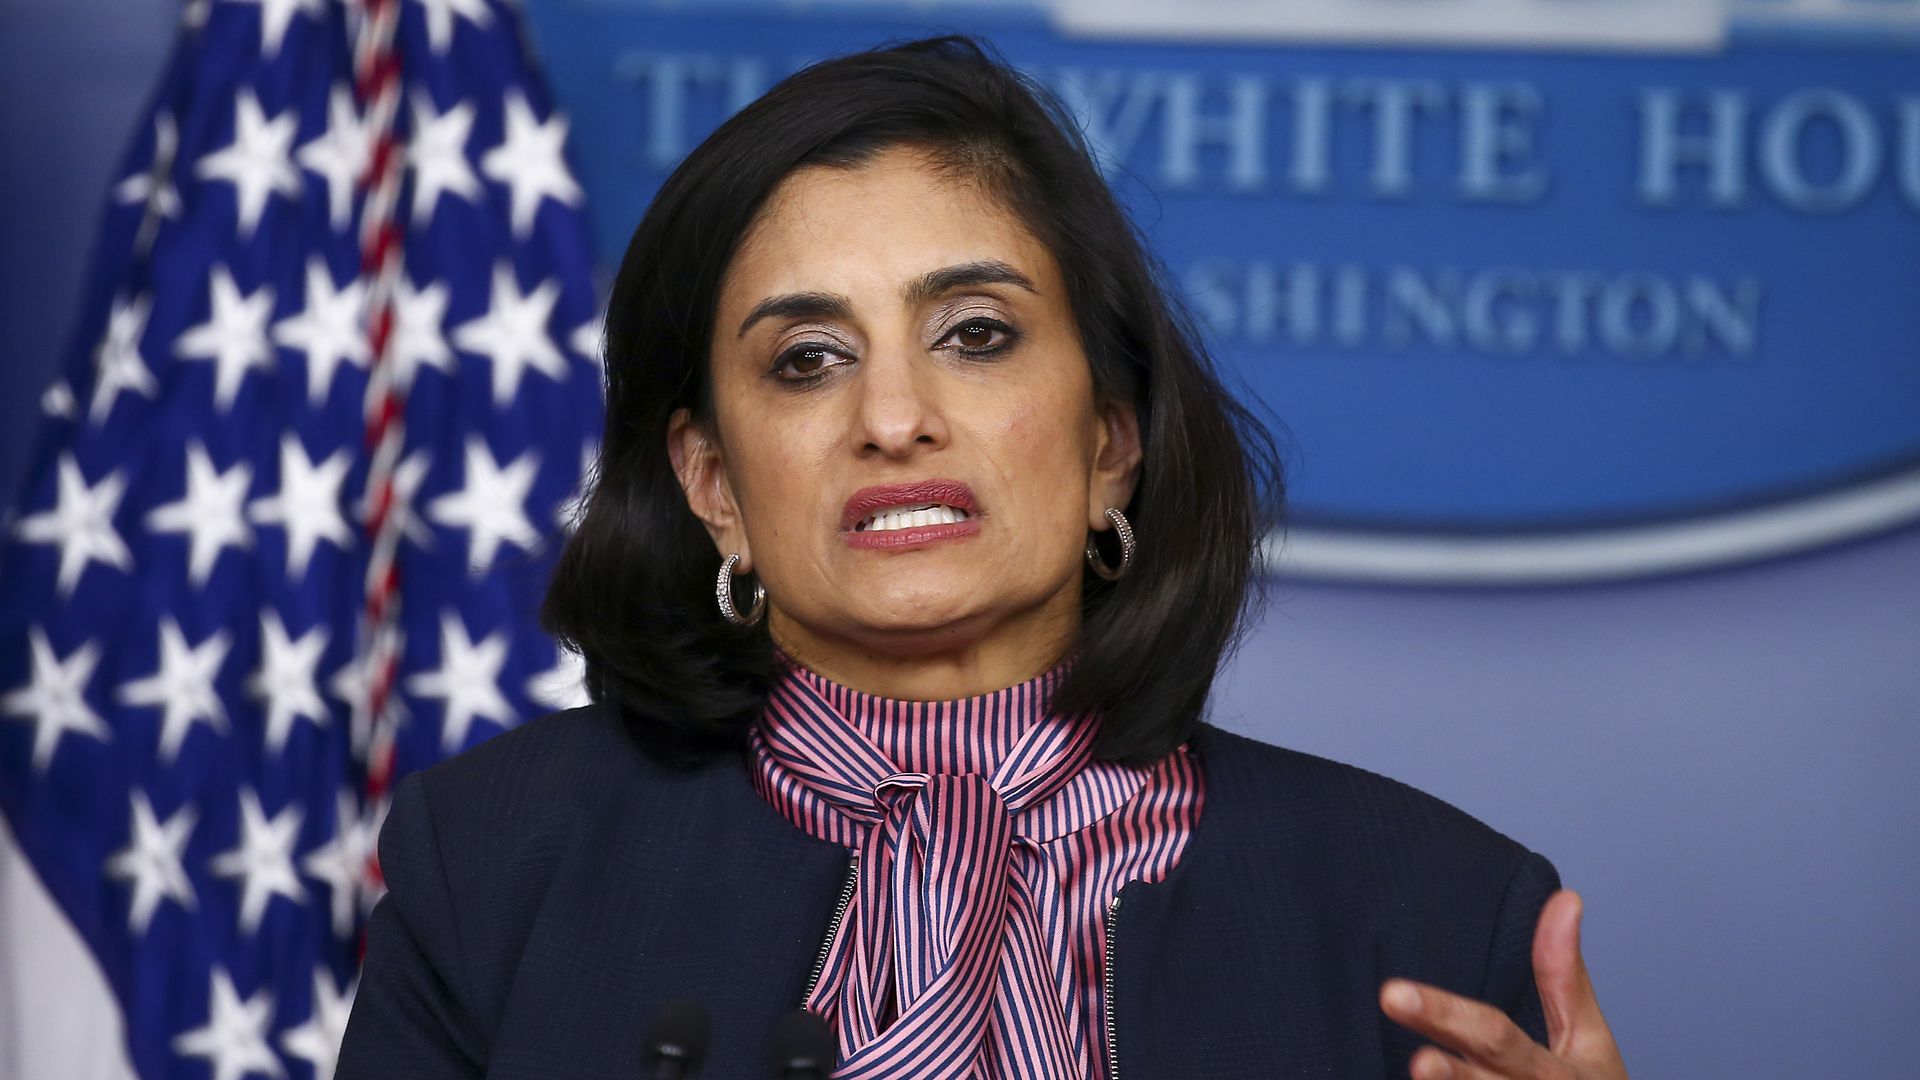 Seema Verma, administrator of the Centers for Medicare and Medicaid Services, speaks at the daily coronavirus briefing at the White House on April 19